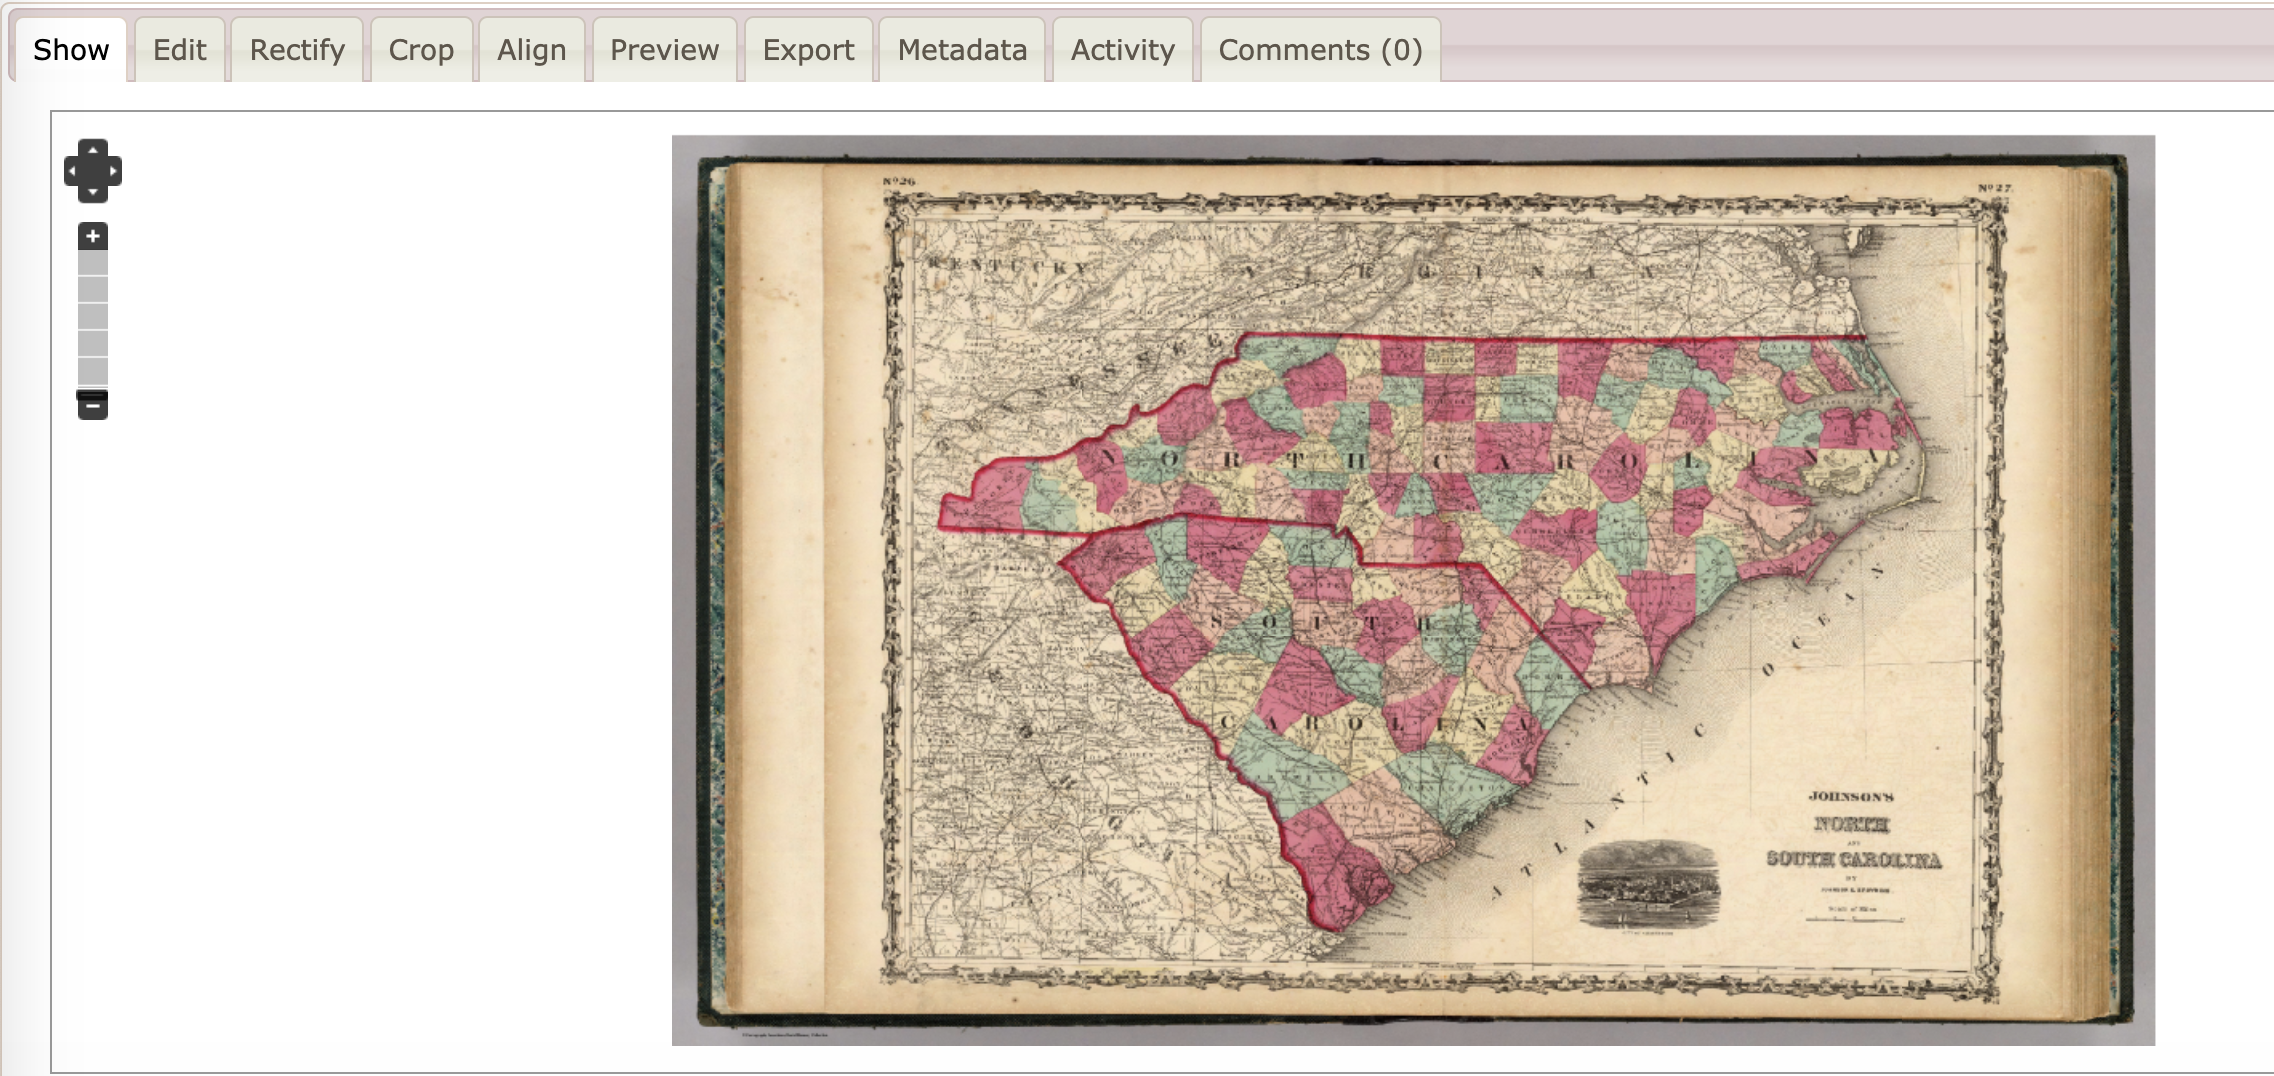 Screenshot of Map Warper's interface, with the Show, Edit, Rectify, Align, Preview and Export tabs at upper left. In the center of the interface is a scanned historical map, depicting North Carolina and South Carolina divided into counties and coloured variously in pink, green and pale yellow